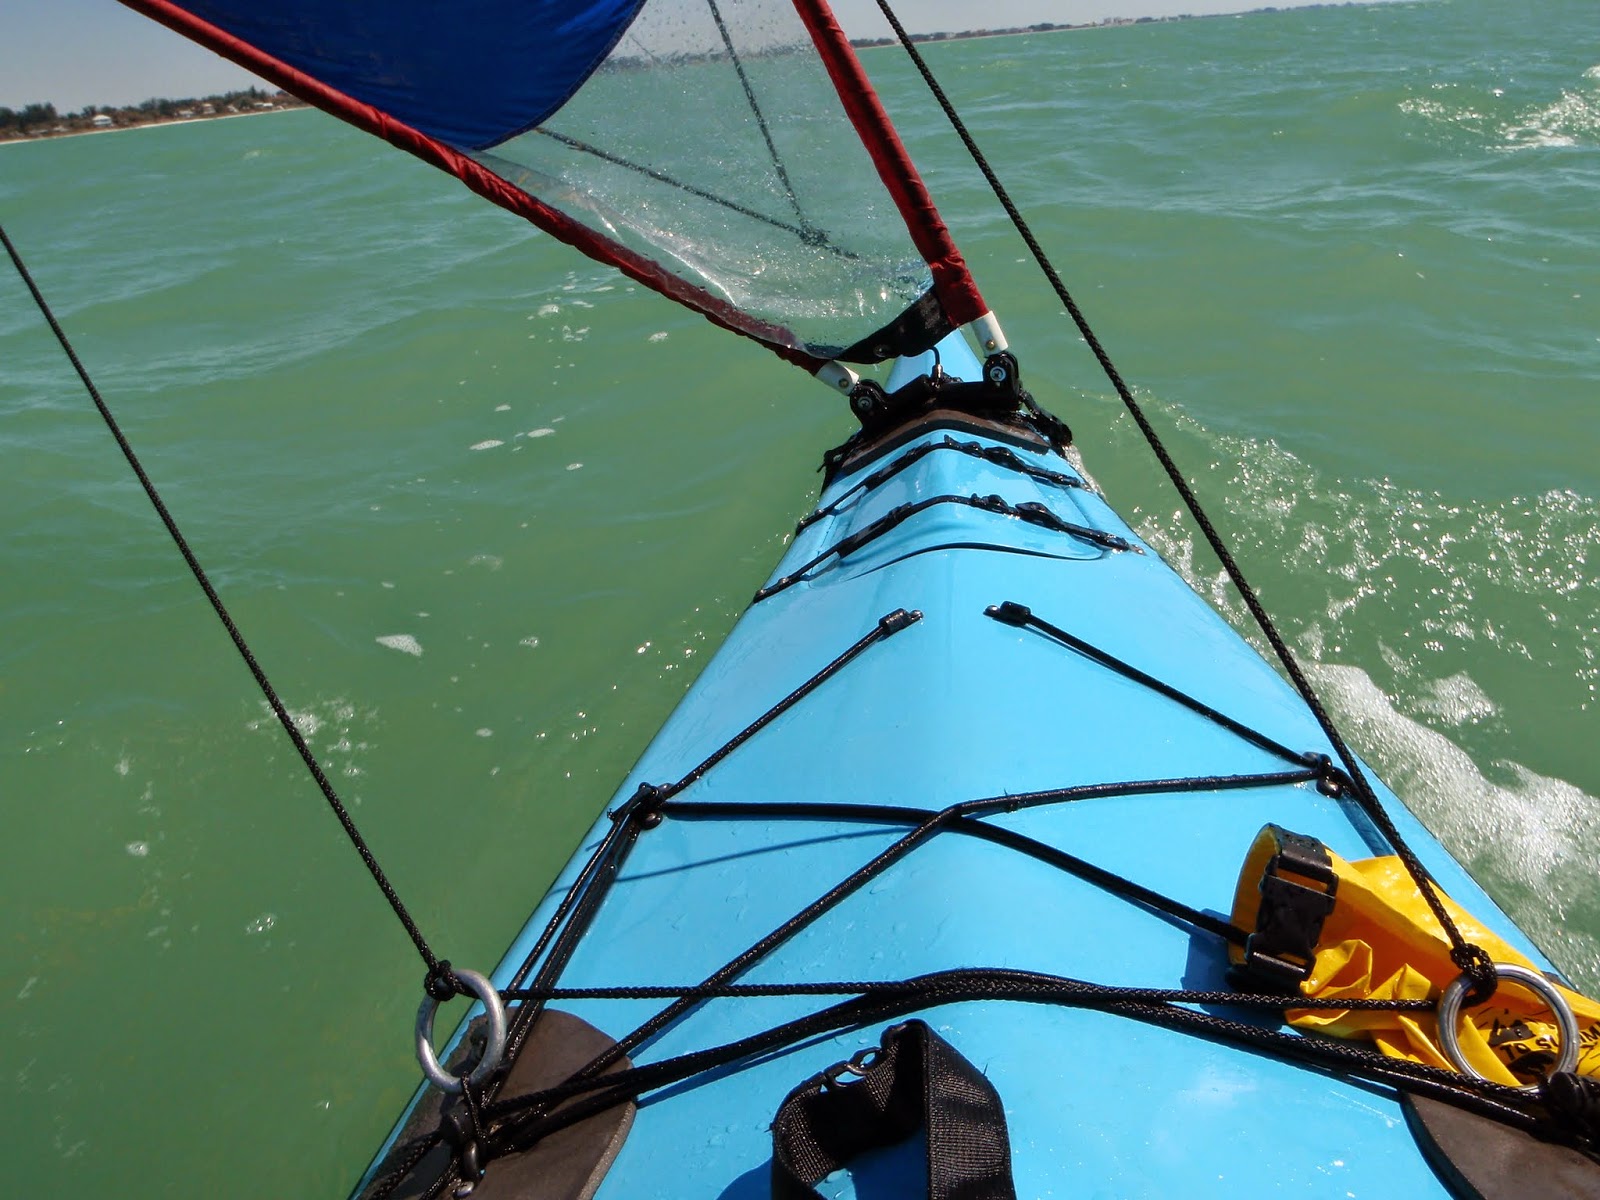 Running downwind in the early afternoon of the Everglades Challenge 2010